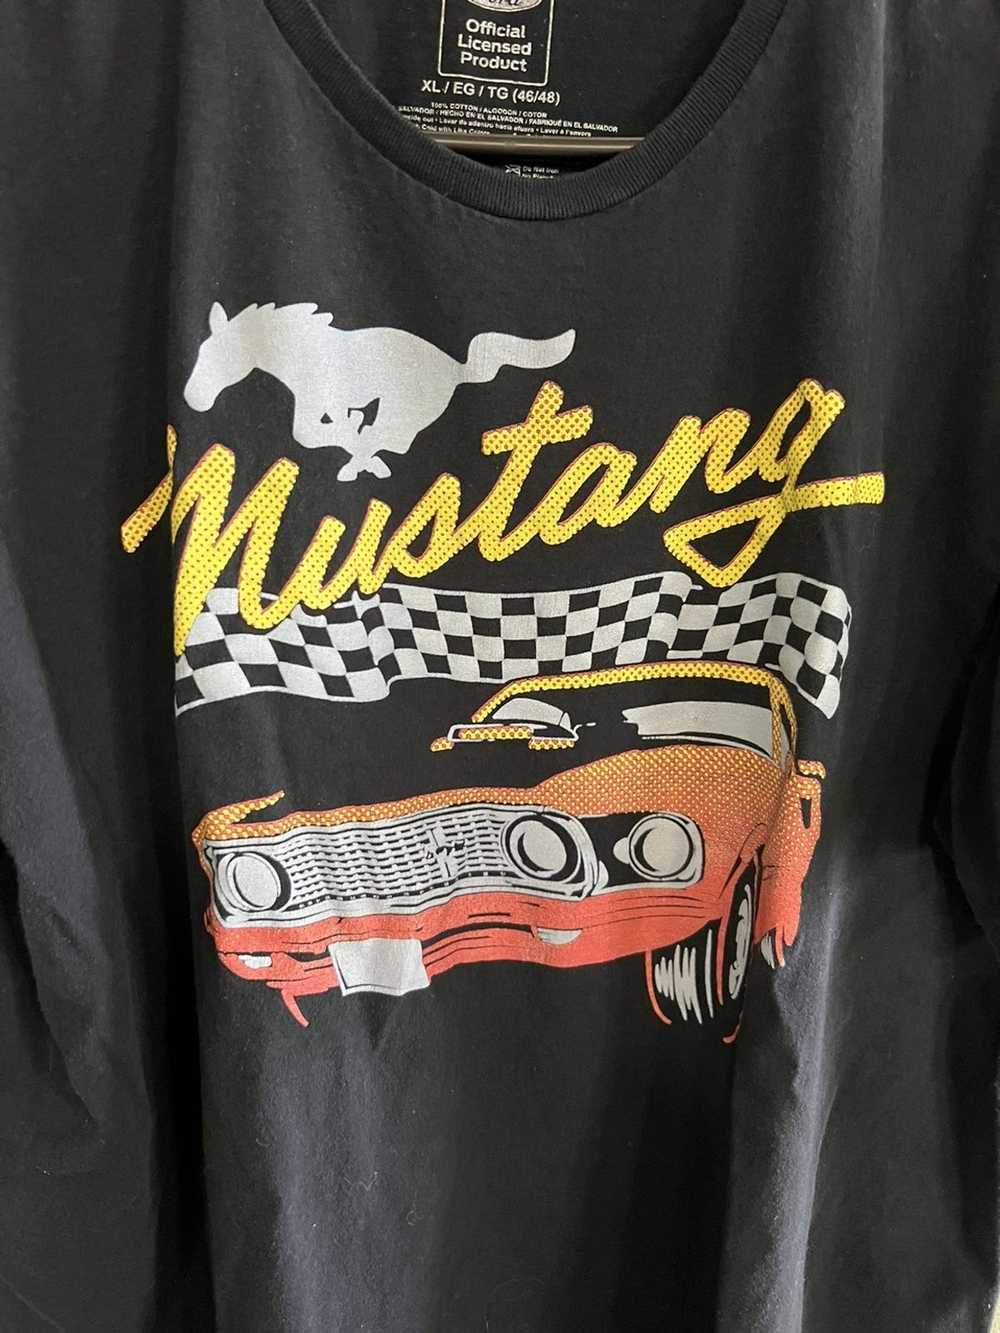 Vintage Vintage Ford Mustang Graphic Tee Size XL - image 2